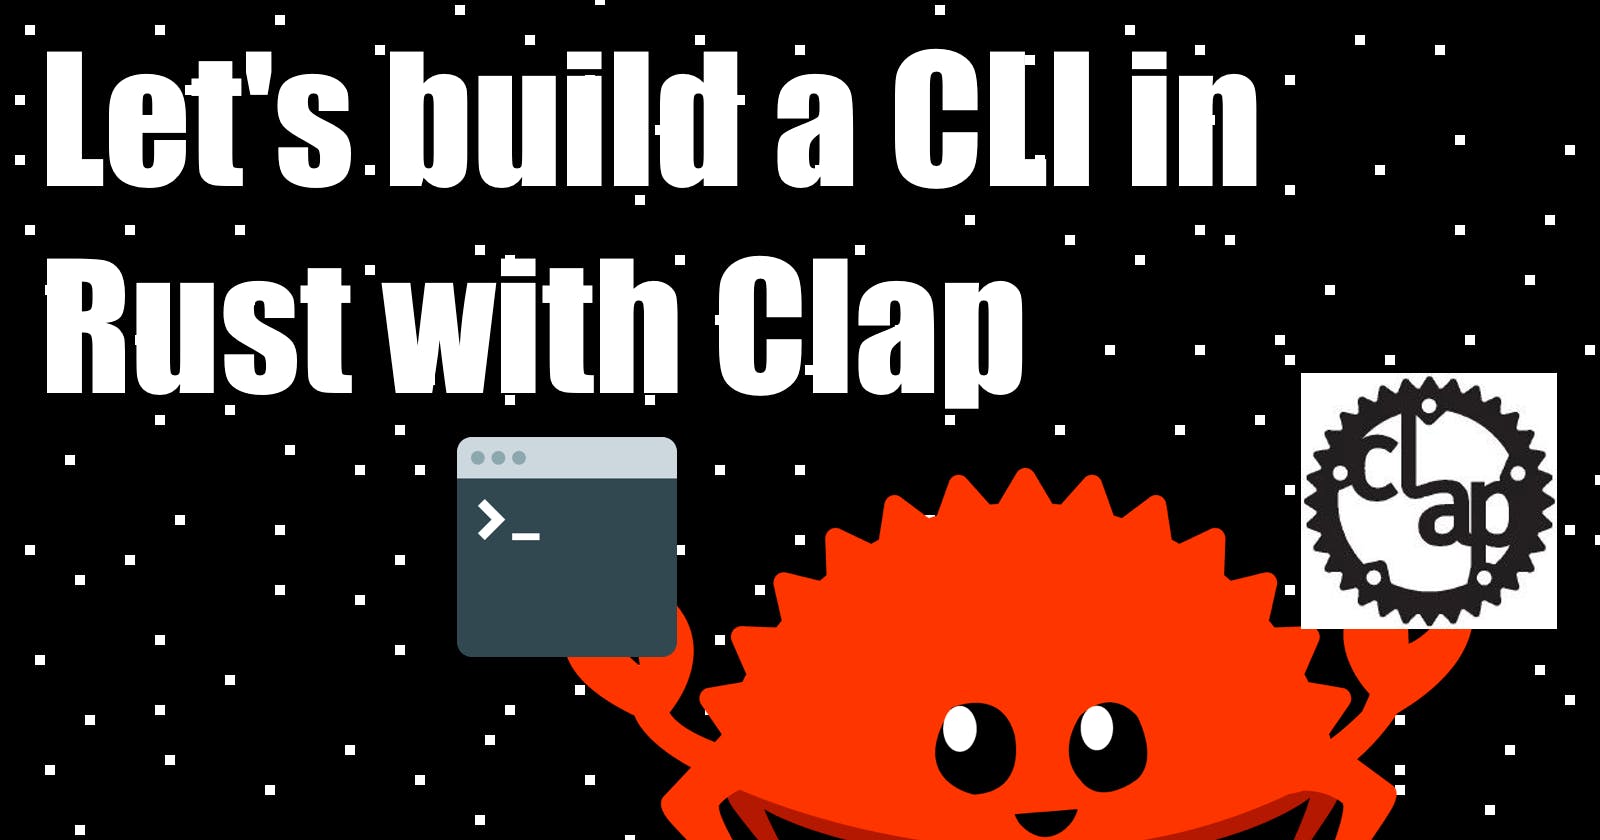 Let's build a CLI in Rust 🦀